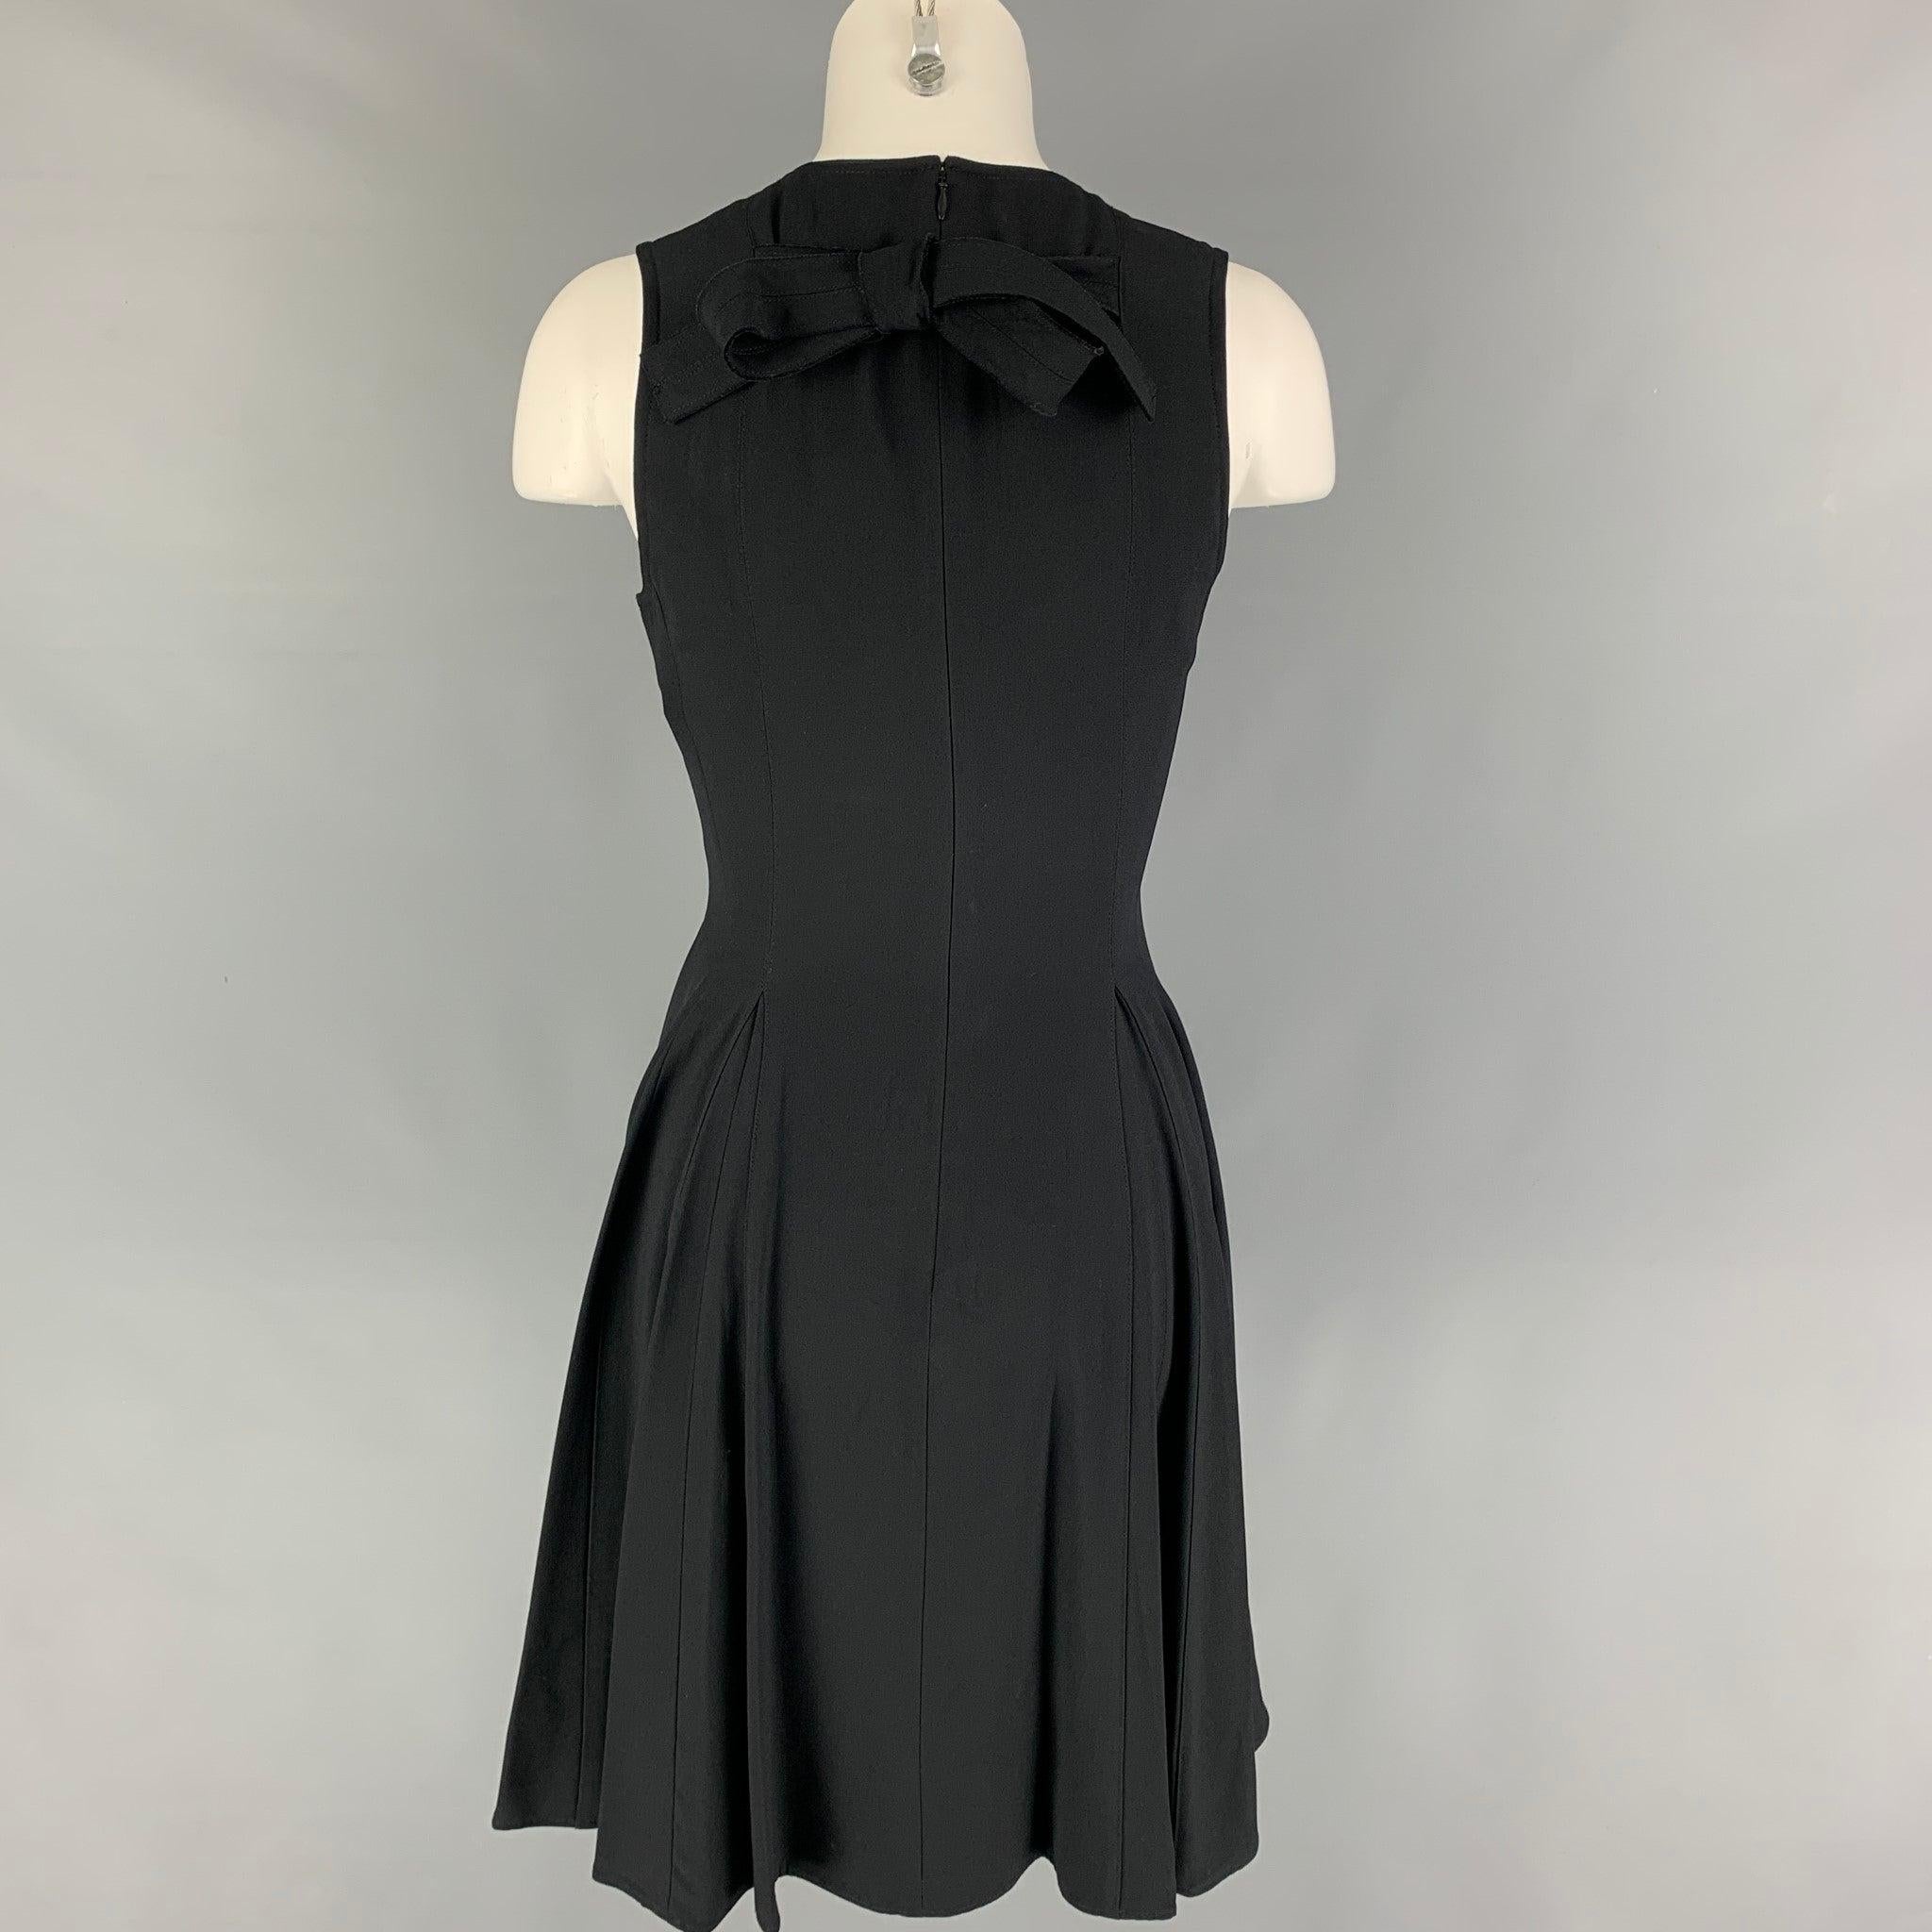 PROENZA SCHOULER dress comes in a black acetate / viscose featuring a a-line style, pleated, sleeveless, back self-tie strap, and a back zip up closure.
New with tags.
 

Marked:  2 

Measurements: 
 
Shoulder: 12 inches Bust: 31 inches Waist: 27